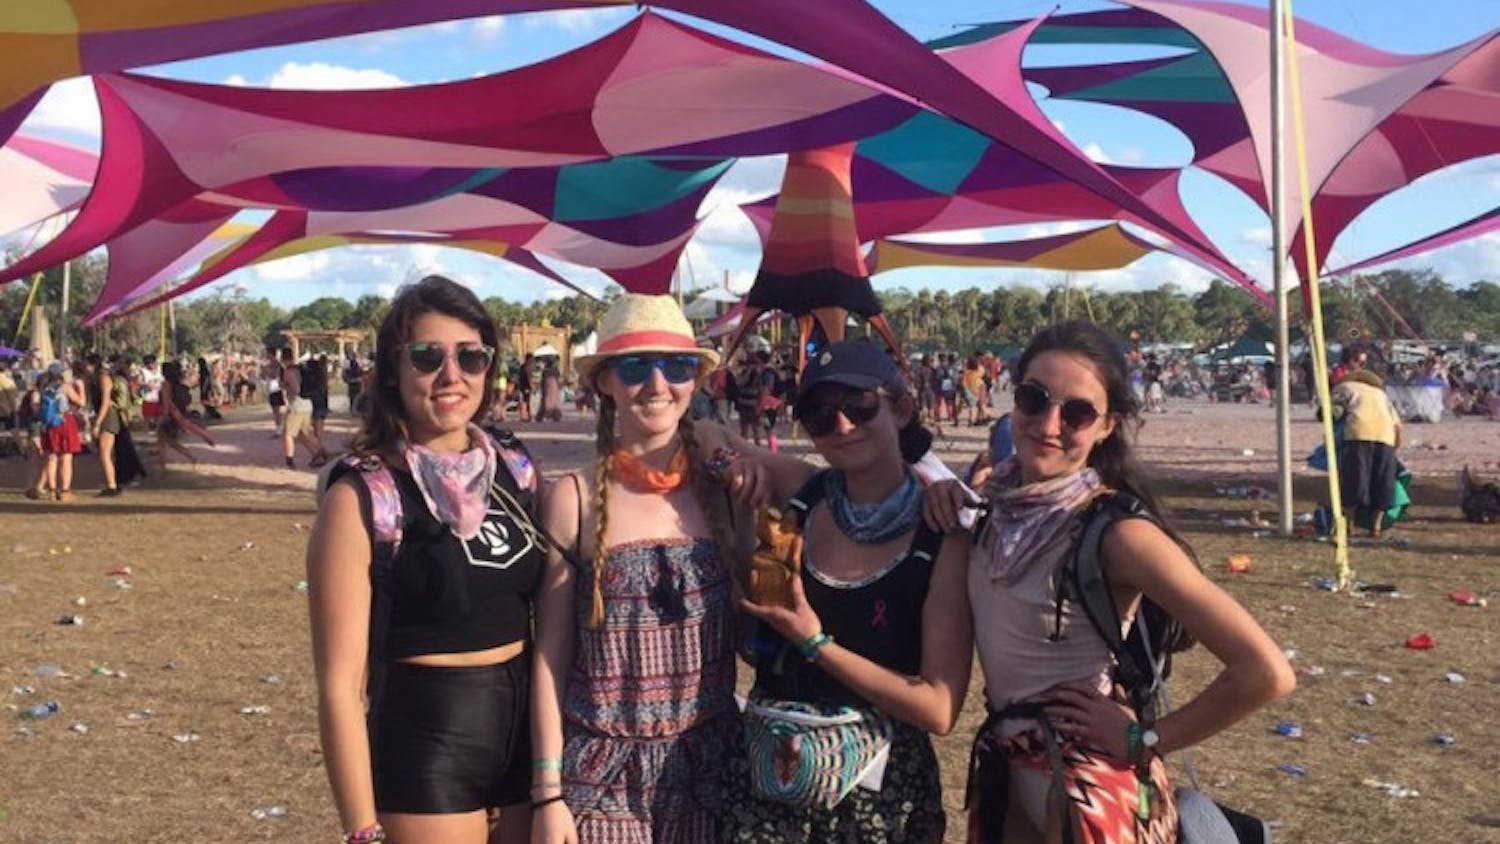 From left: Caroline Alfano, Nicole Scherten, Laura Delaney and Meghan Mapes pose together at Okeechobee Music Festival on March 4. The next day, Alfano and Scherten left for Alfano’s home in Boca Raton and died in a crash.